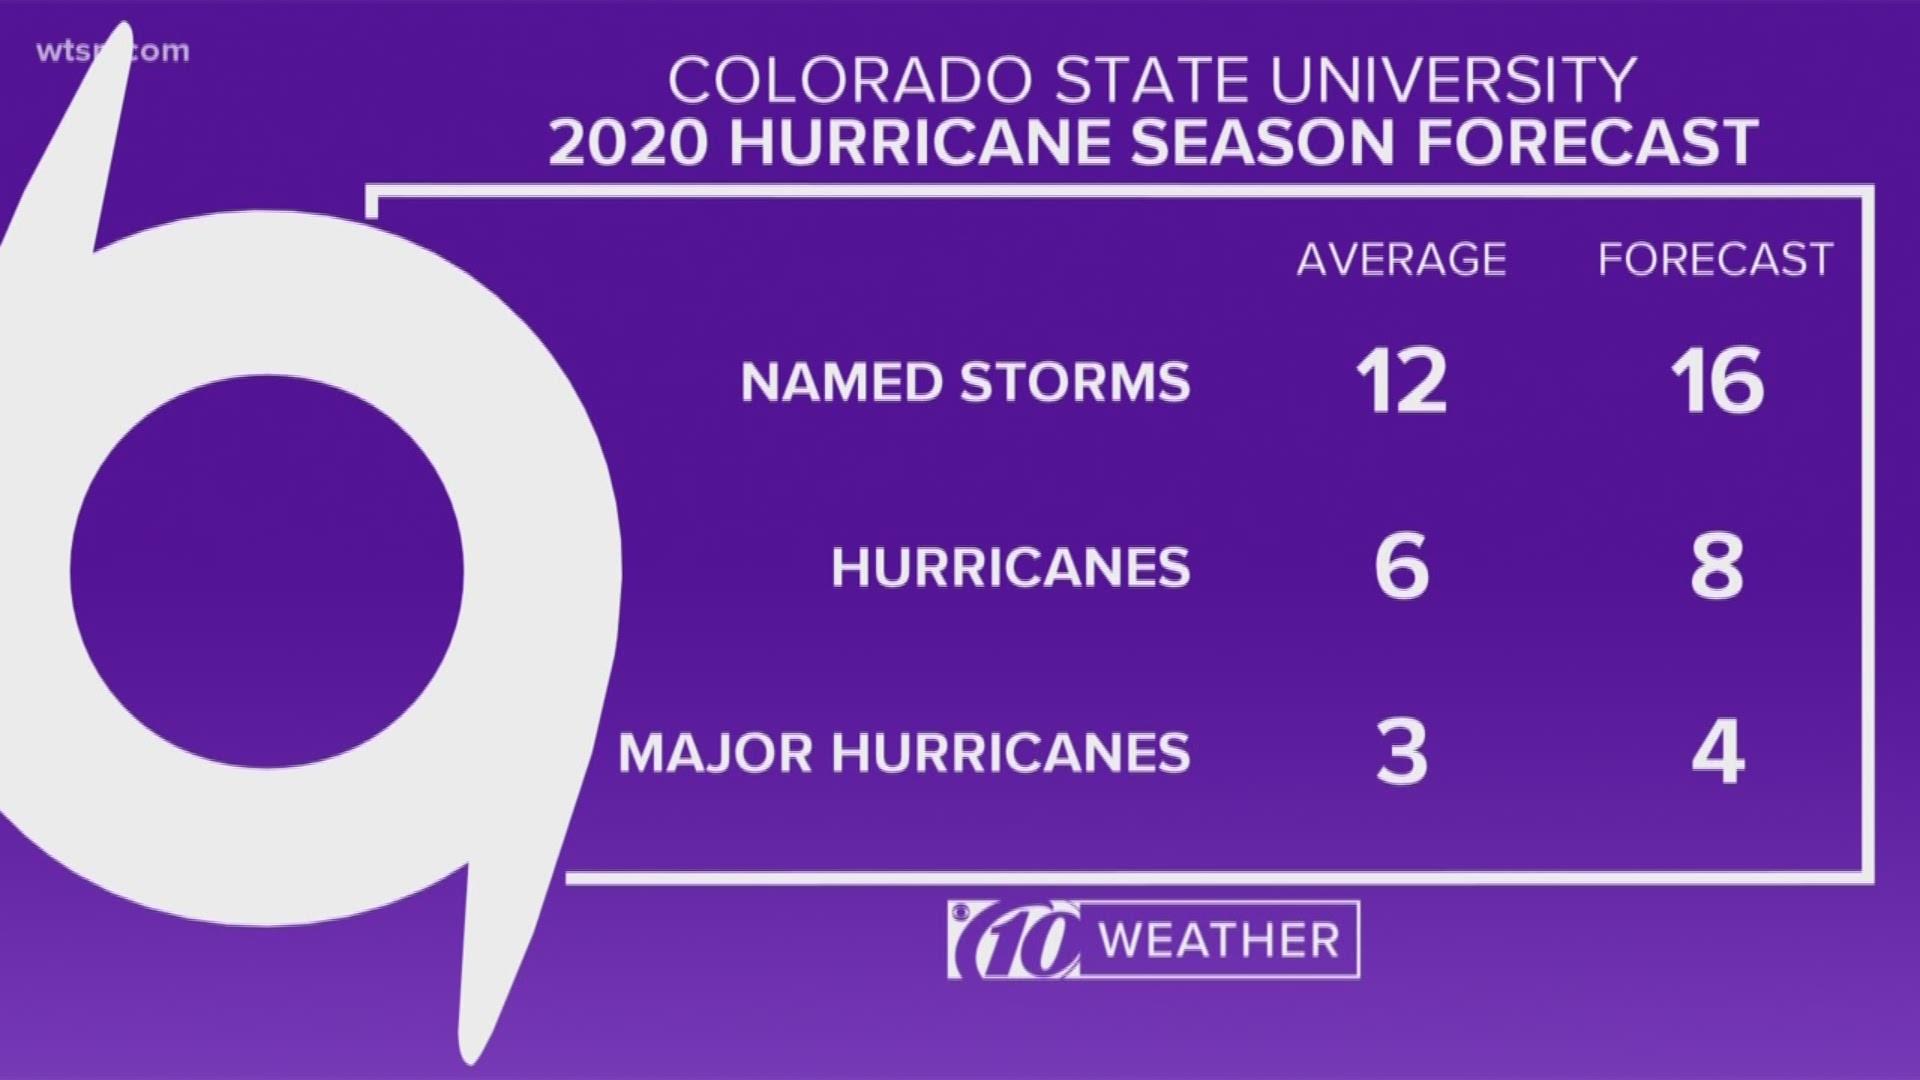 The upcoming hurricane season is predicted to be above average.